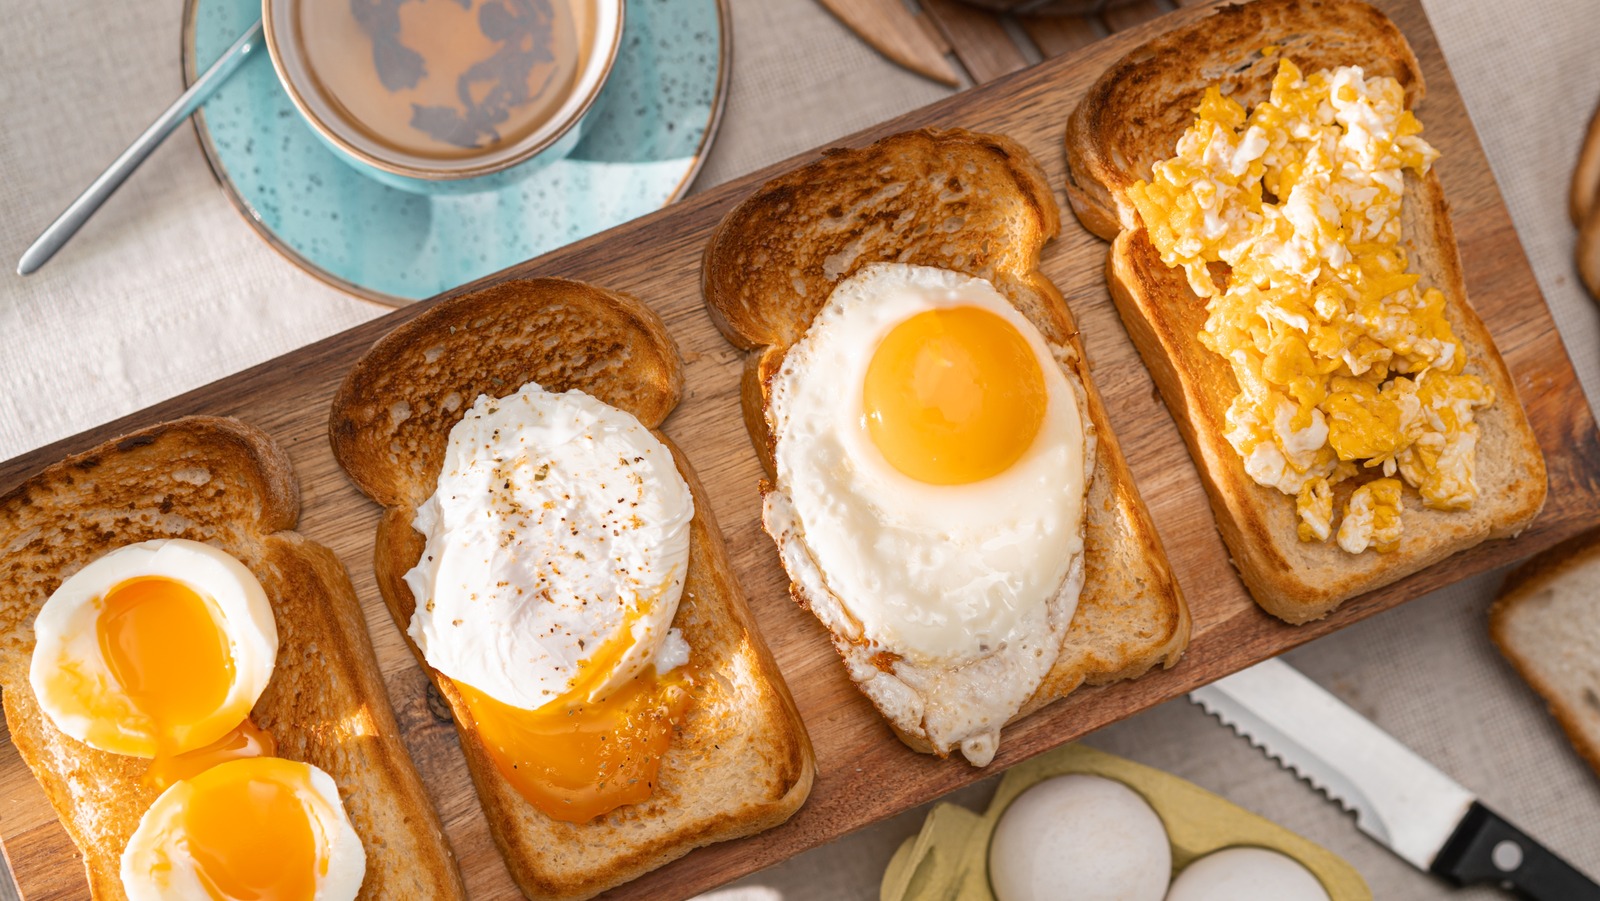 10 Creative EGG Molds For Fried & Boiled Eggs That Will Make You